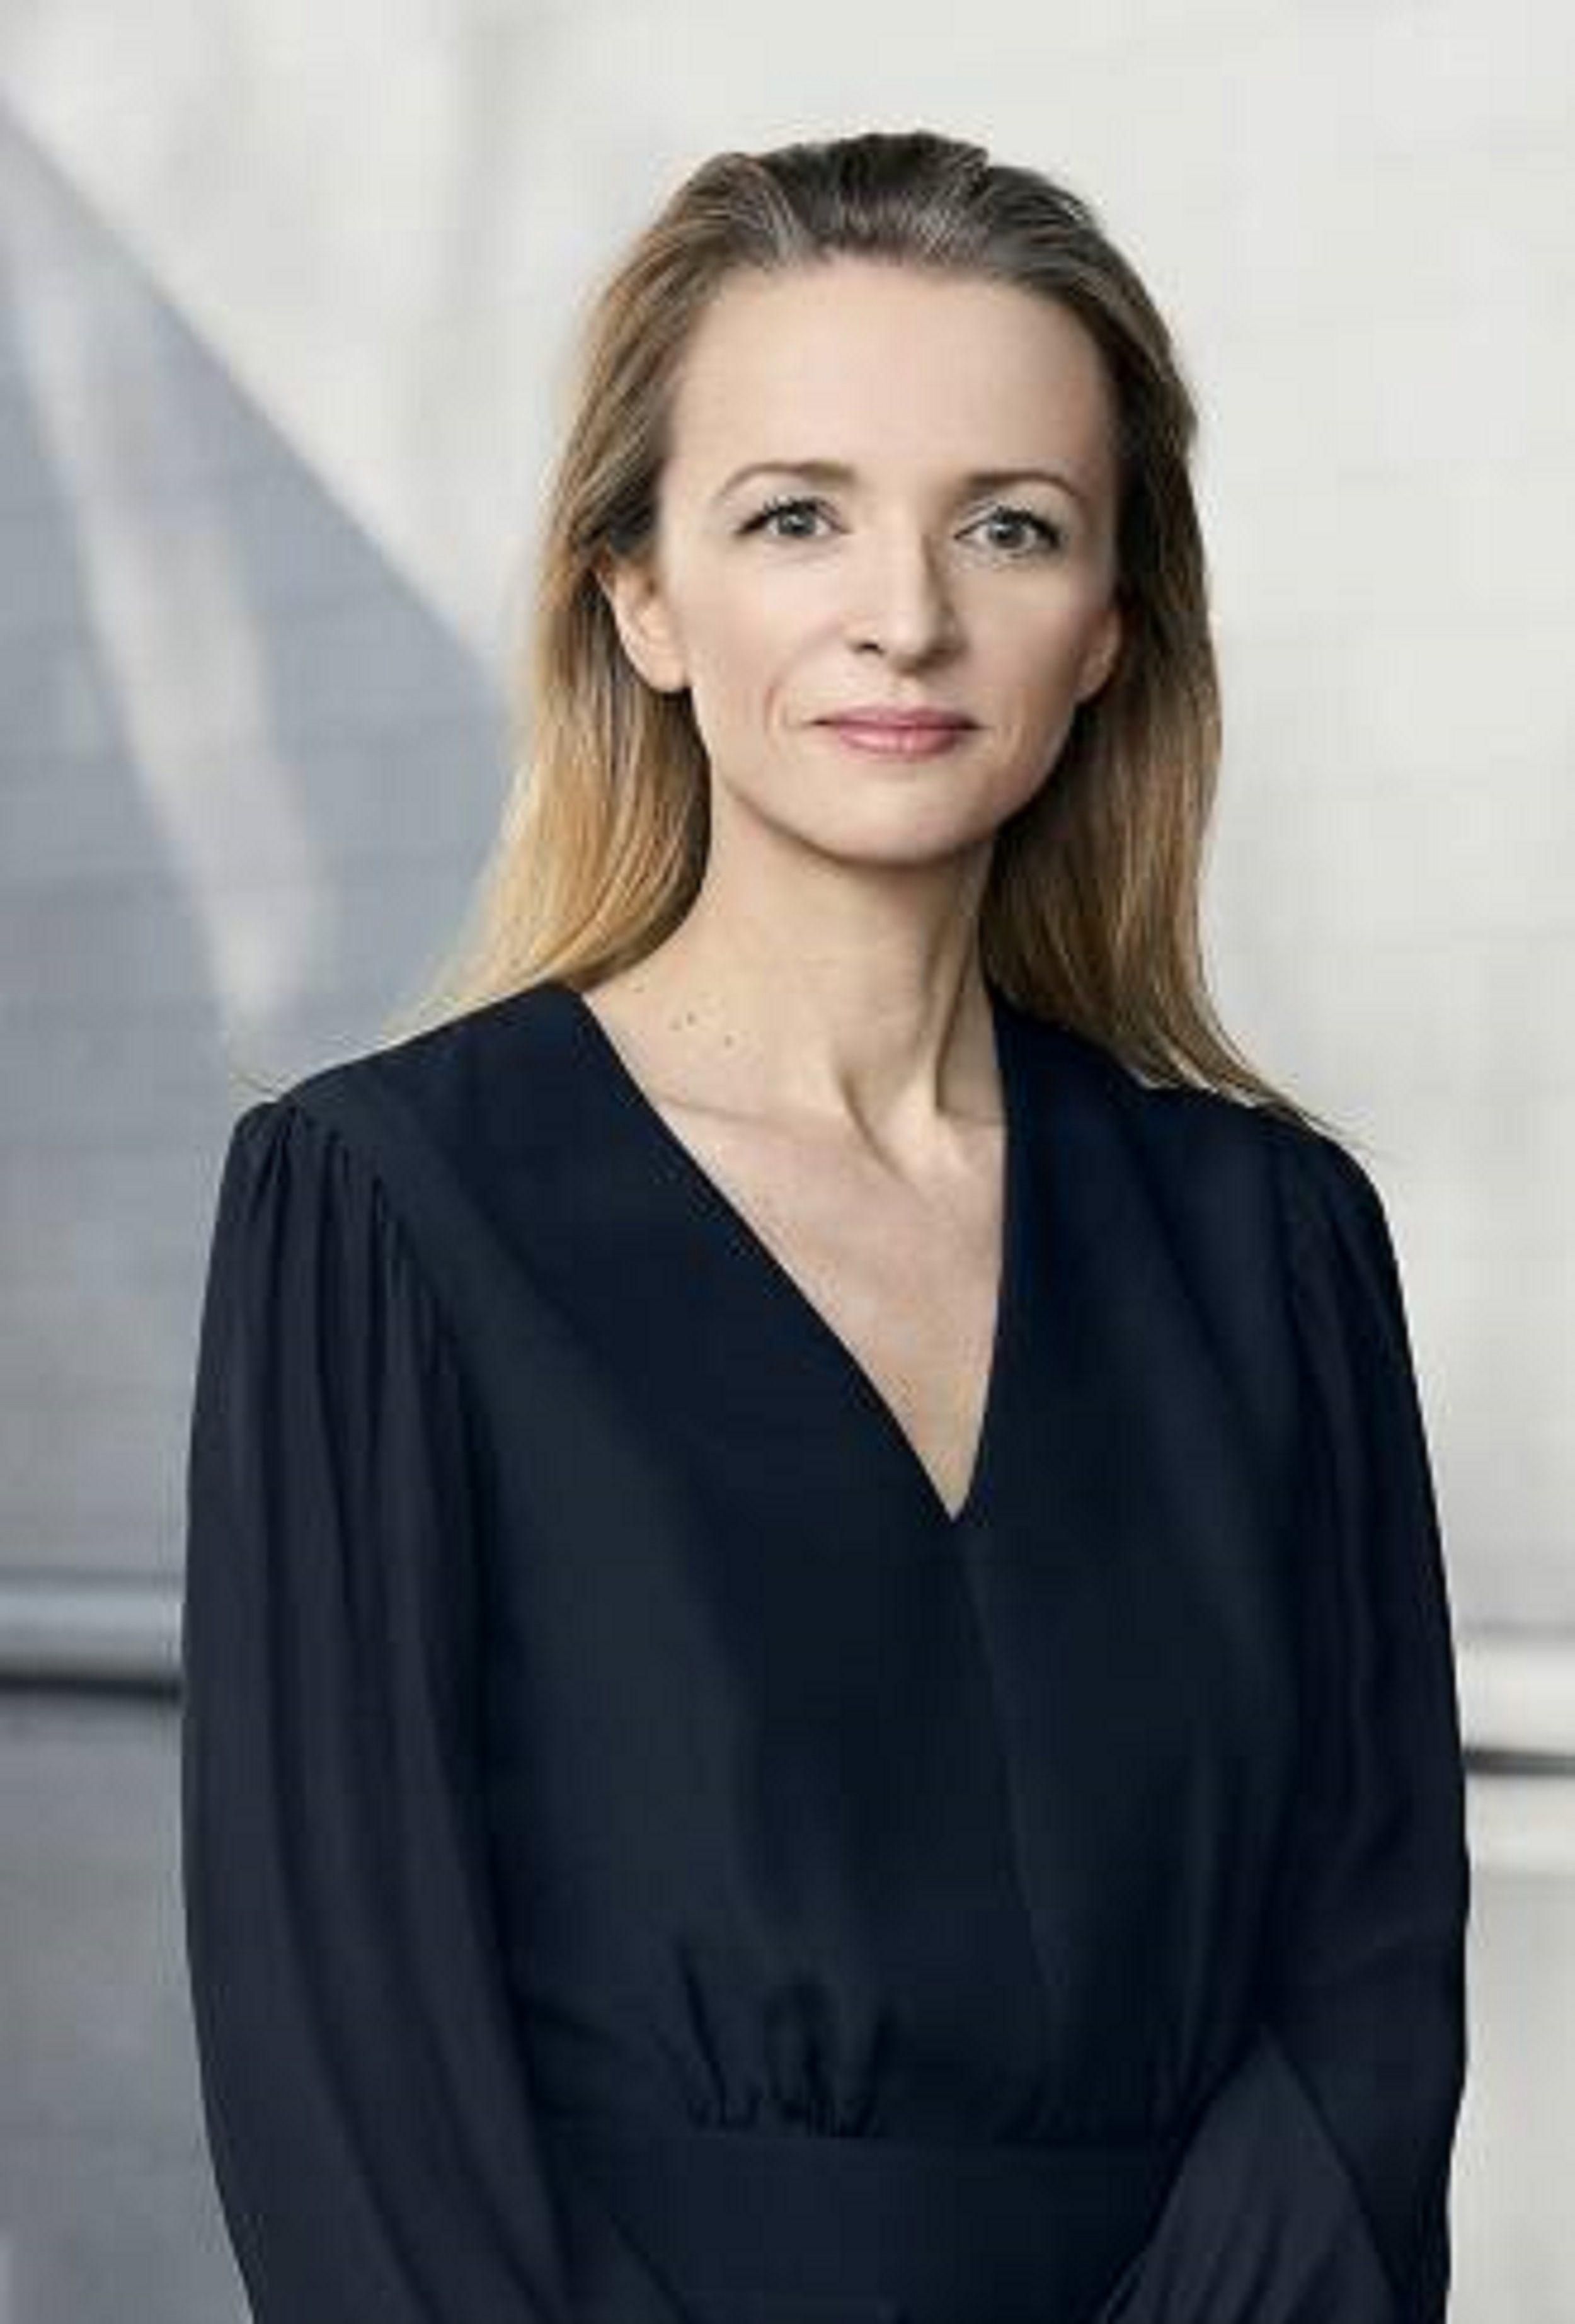 New Dior boss Delphine Arnault is daughter of current owner